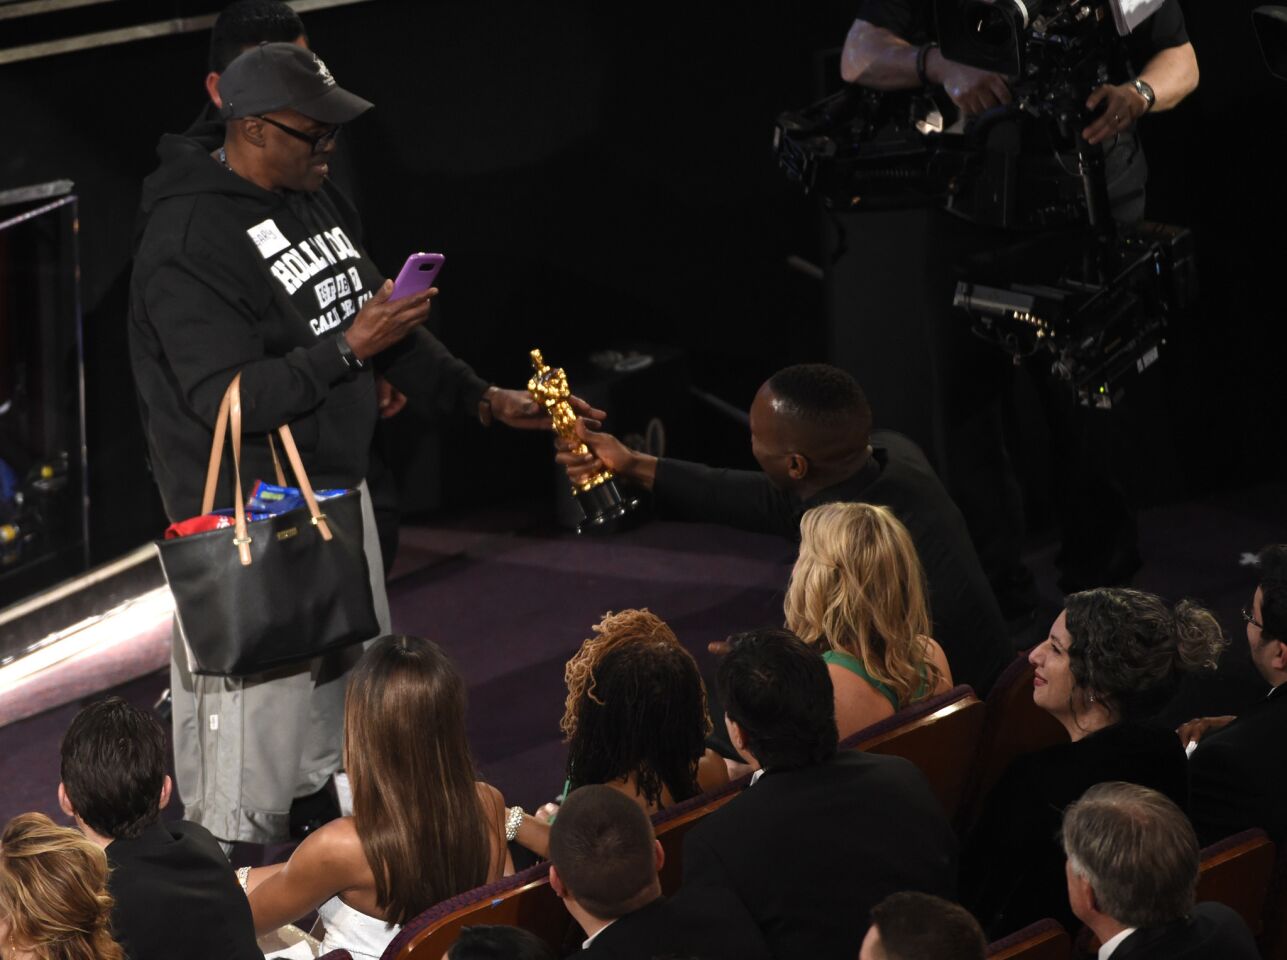 Mahershala Ali, right, hands his Oscar to a tourist named Gary who was brought into the theater with others as a surprise.